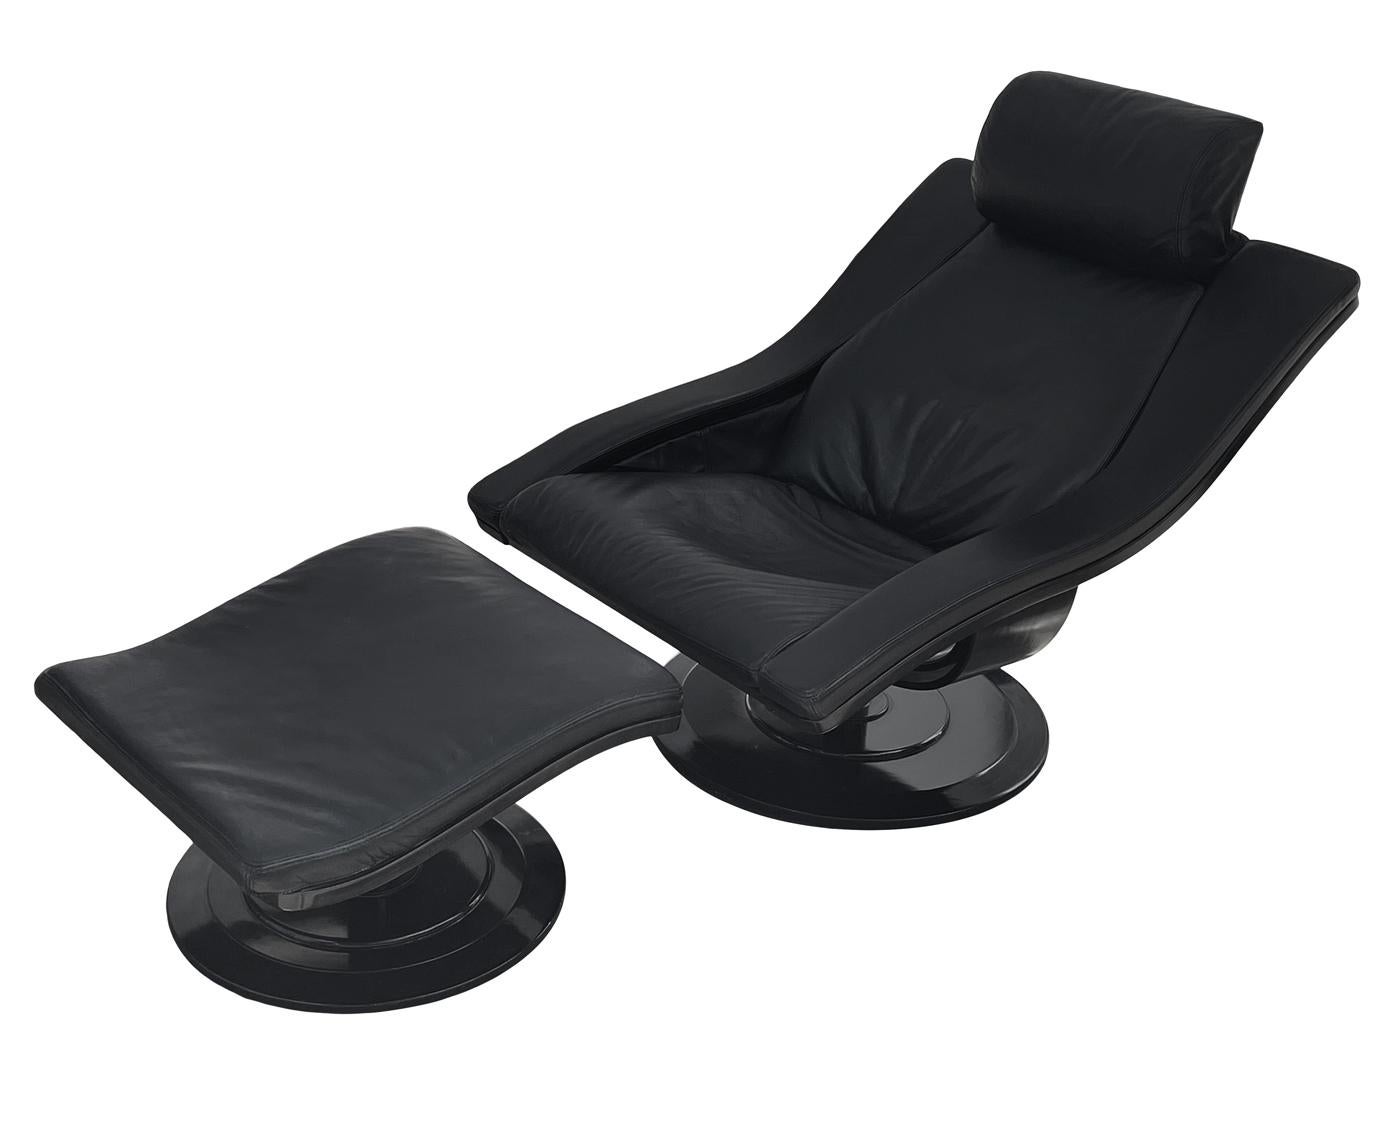 Nelo Sweden swivel lounge chair by Takashi Okamura & Erik Marquardsen, in black leather with matching ottoman. Heavy well-made set with black ebony wood bases. Price includes the set. Ottoman measures 21